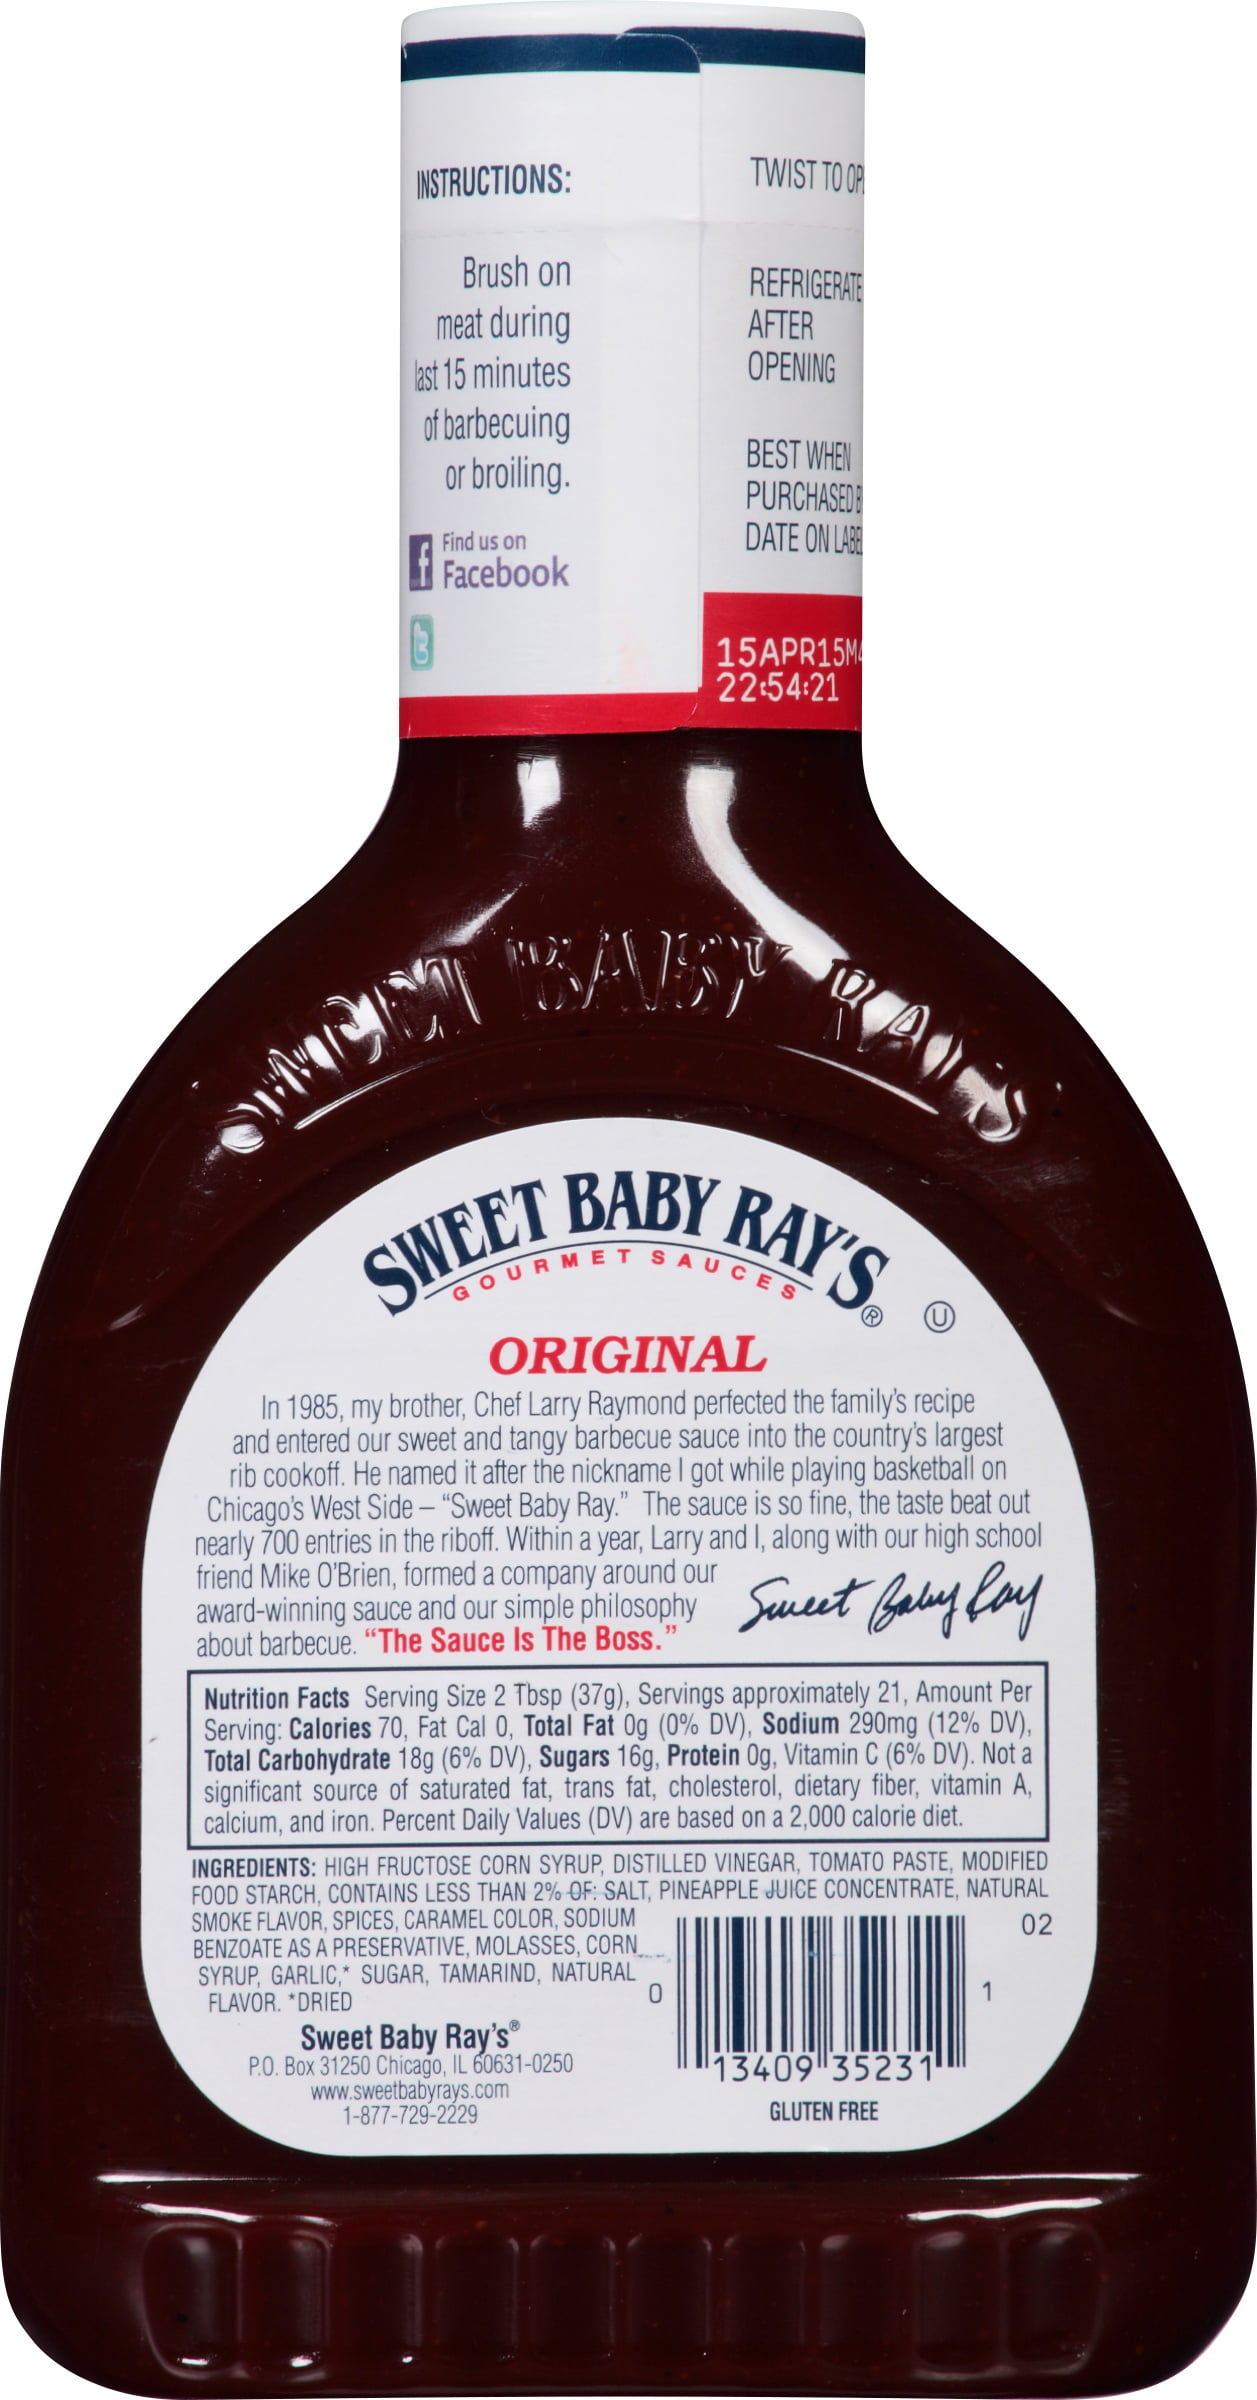 30 Sweet Baby Rays Ingredient Label